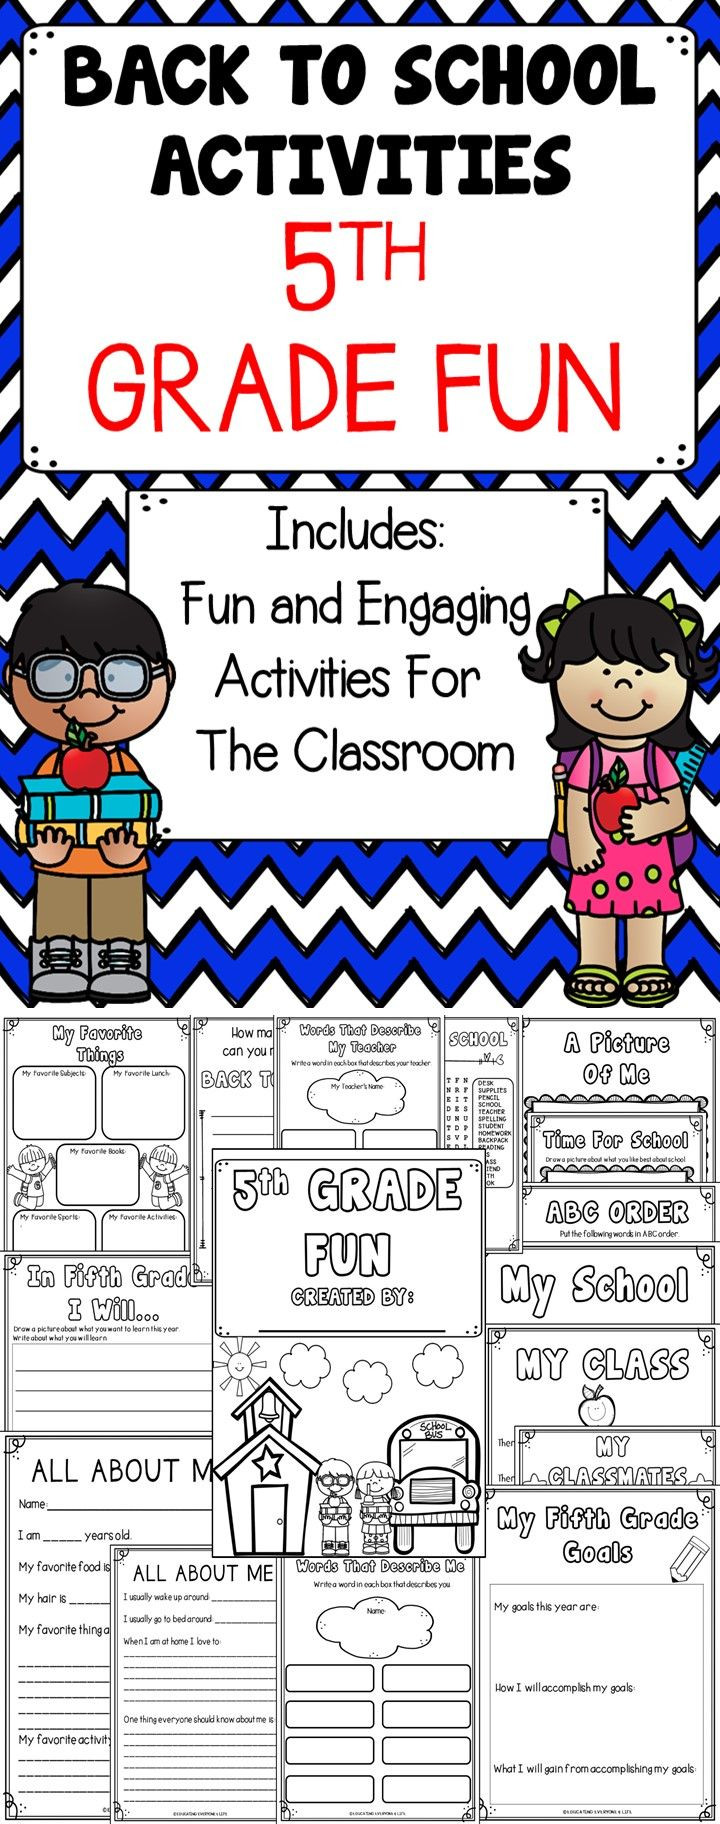 Back To School Activities
 5th Grade Fun Is A Fun and Engaging Back To School